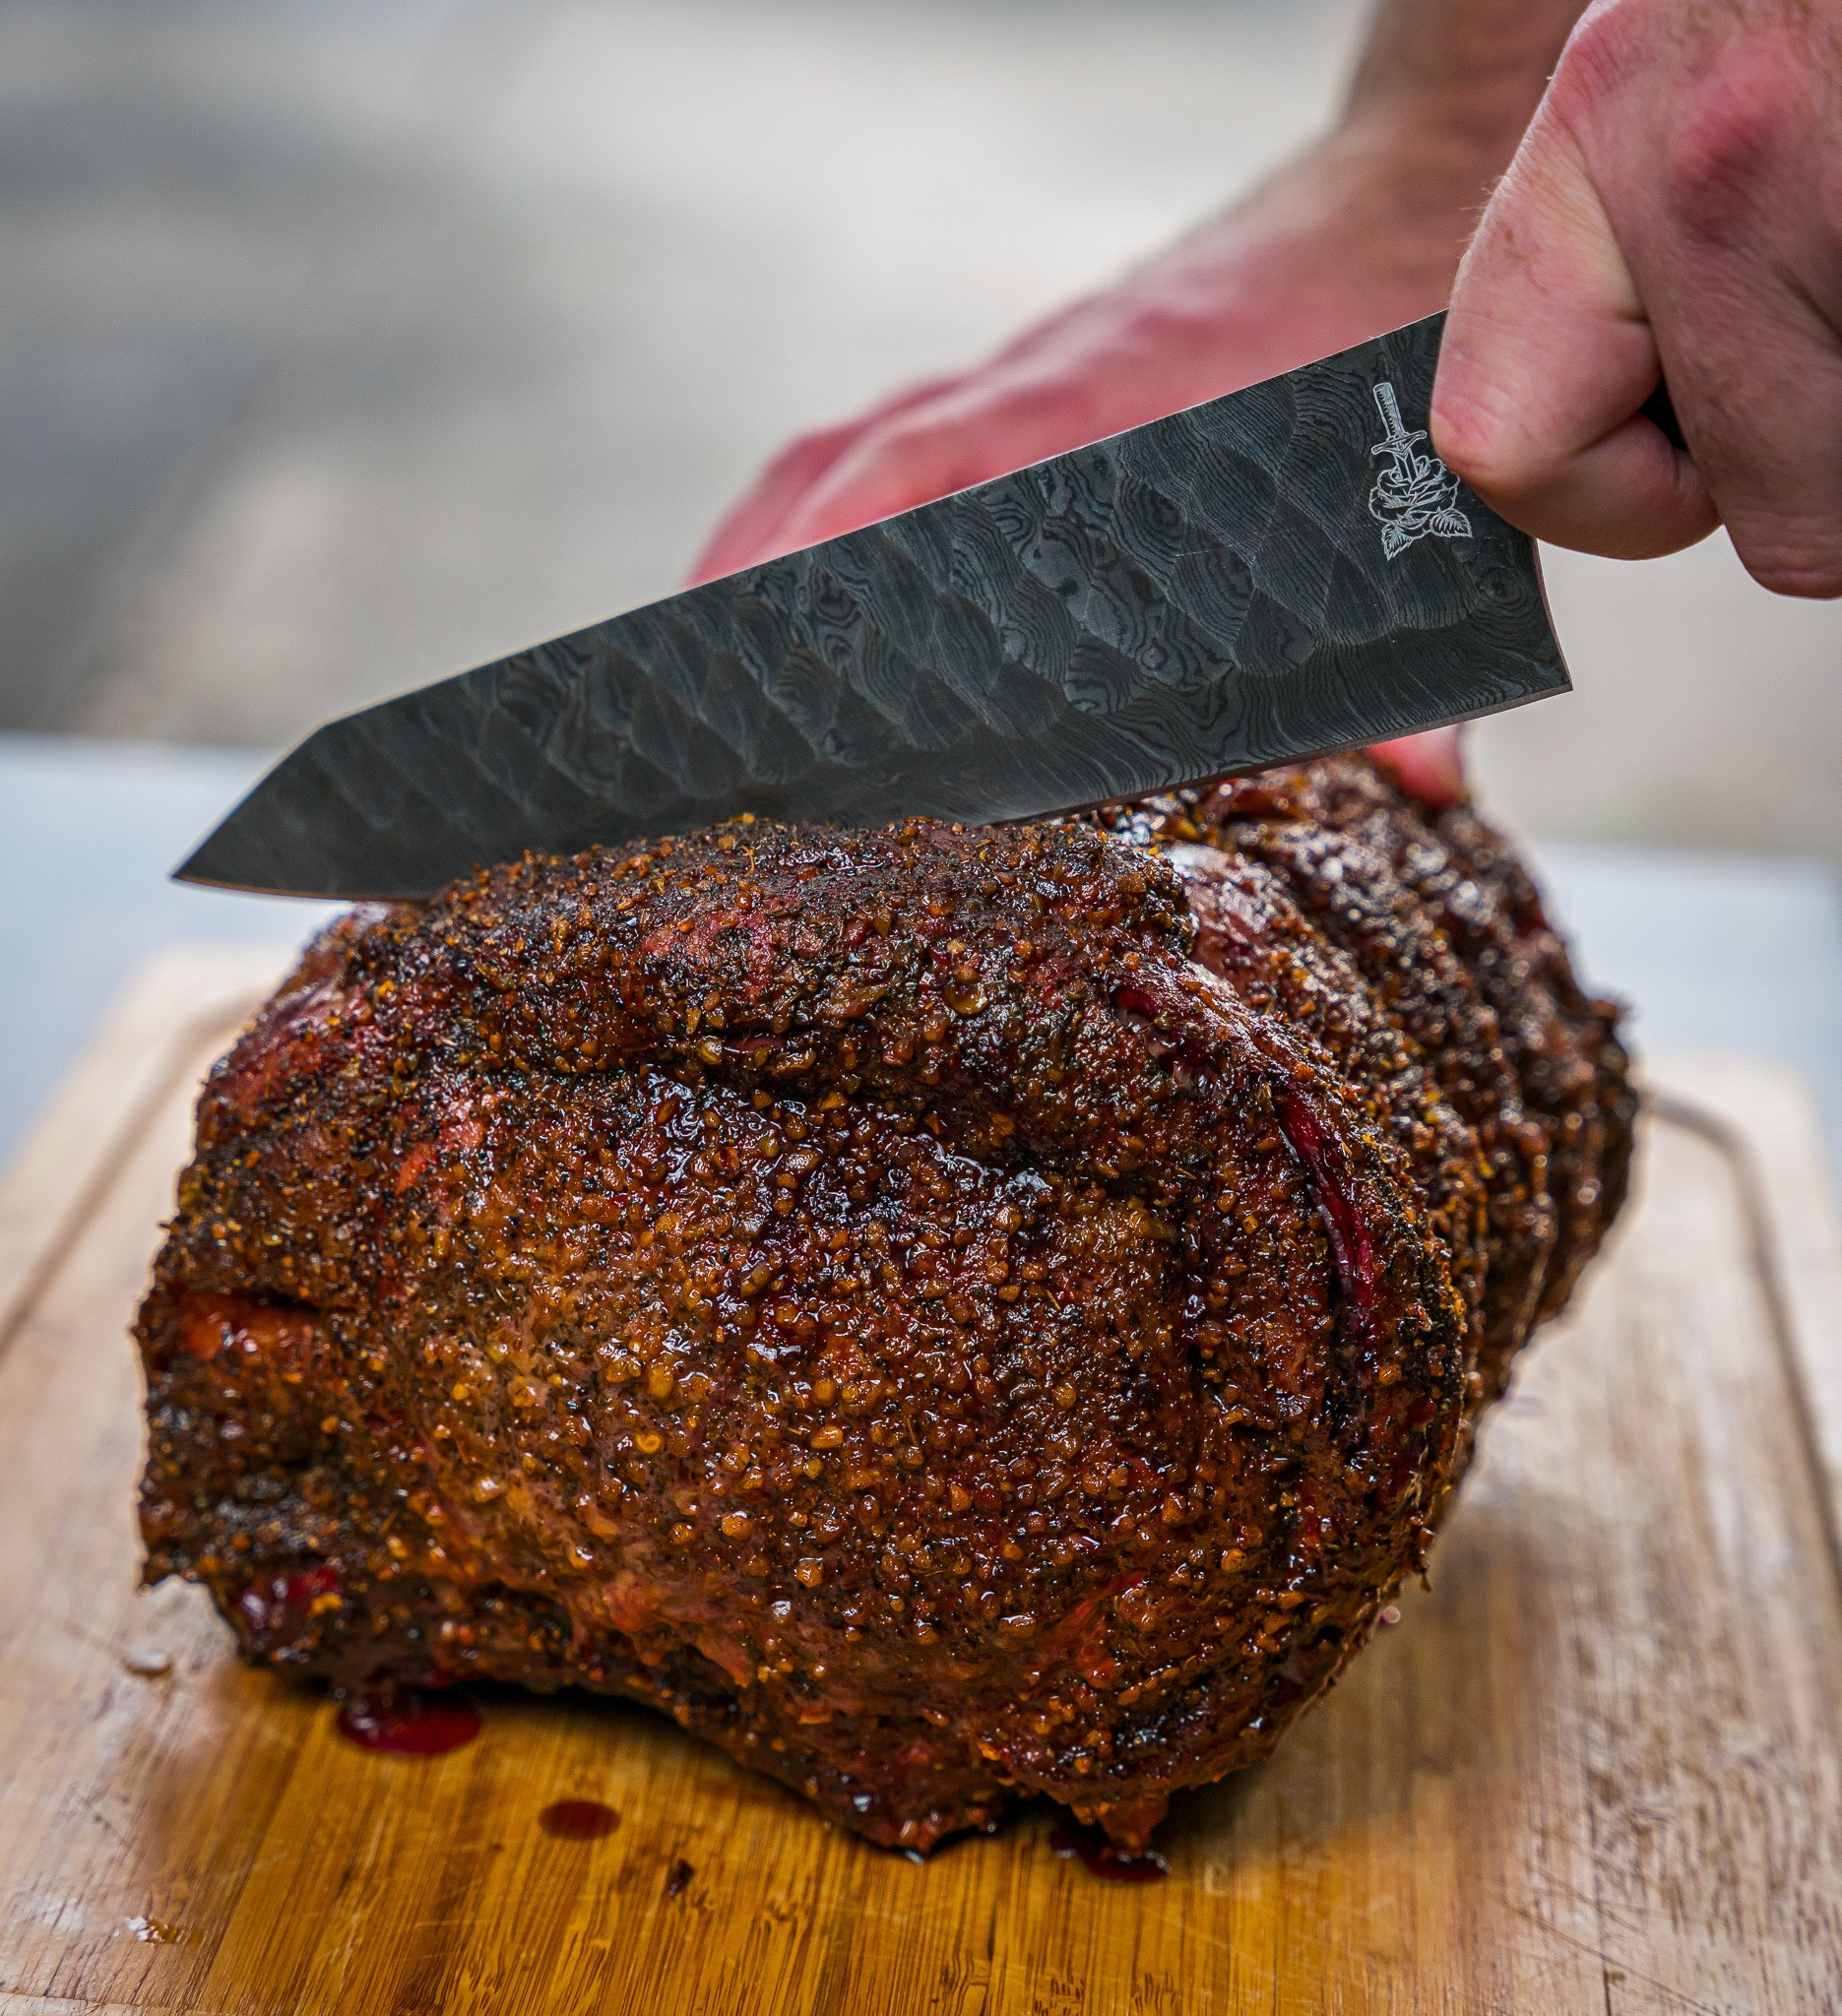 Pellet Grill Prime Rib Awesome Perfect Pellet Grill Smoked Prime Rib Roast Grilling 24x7